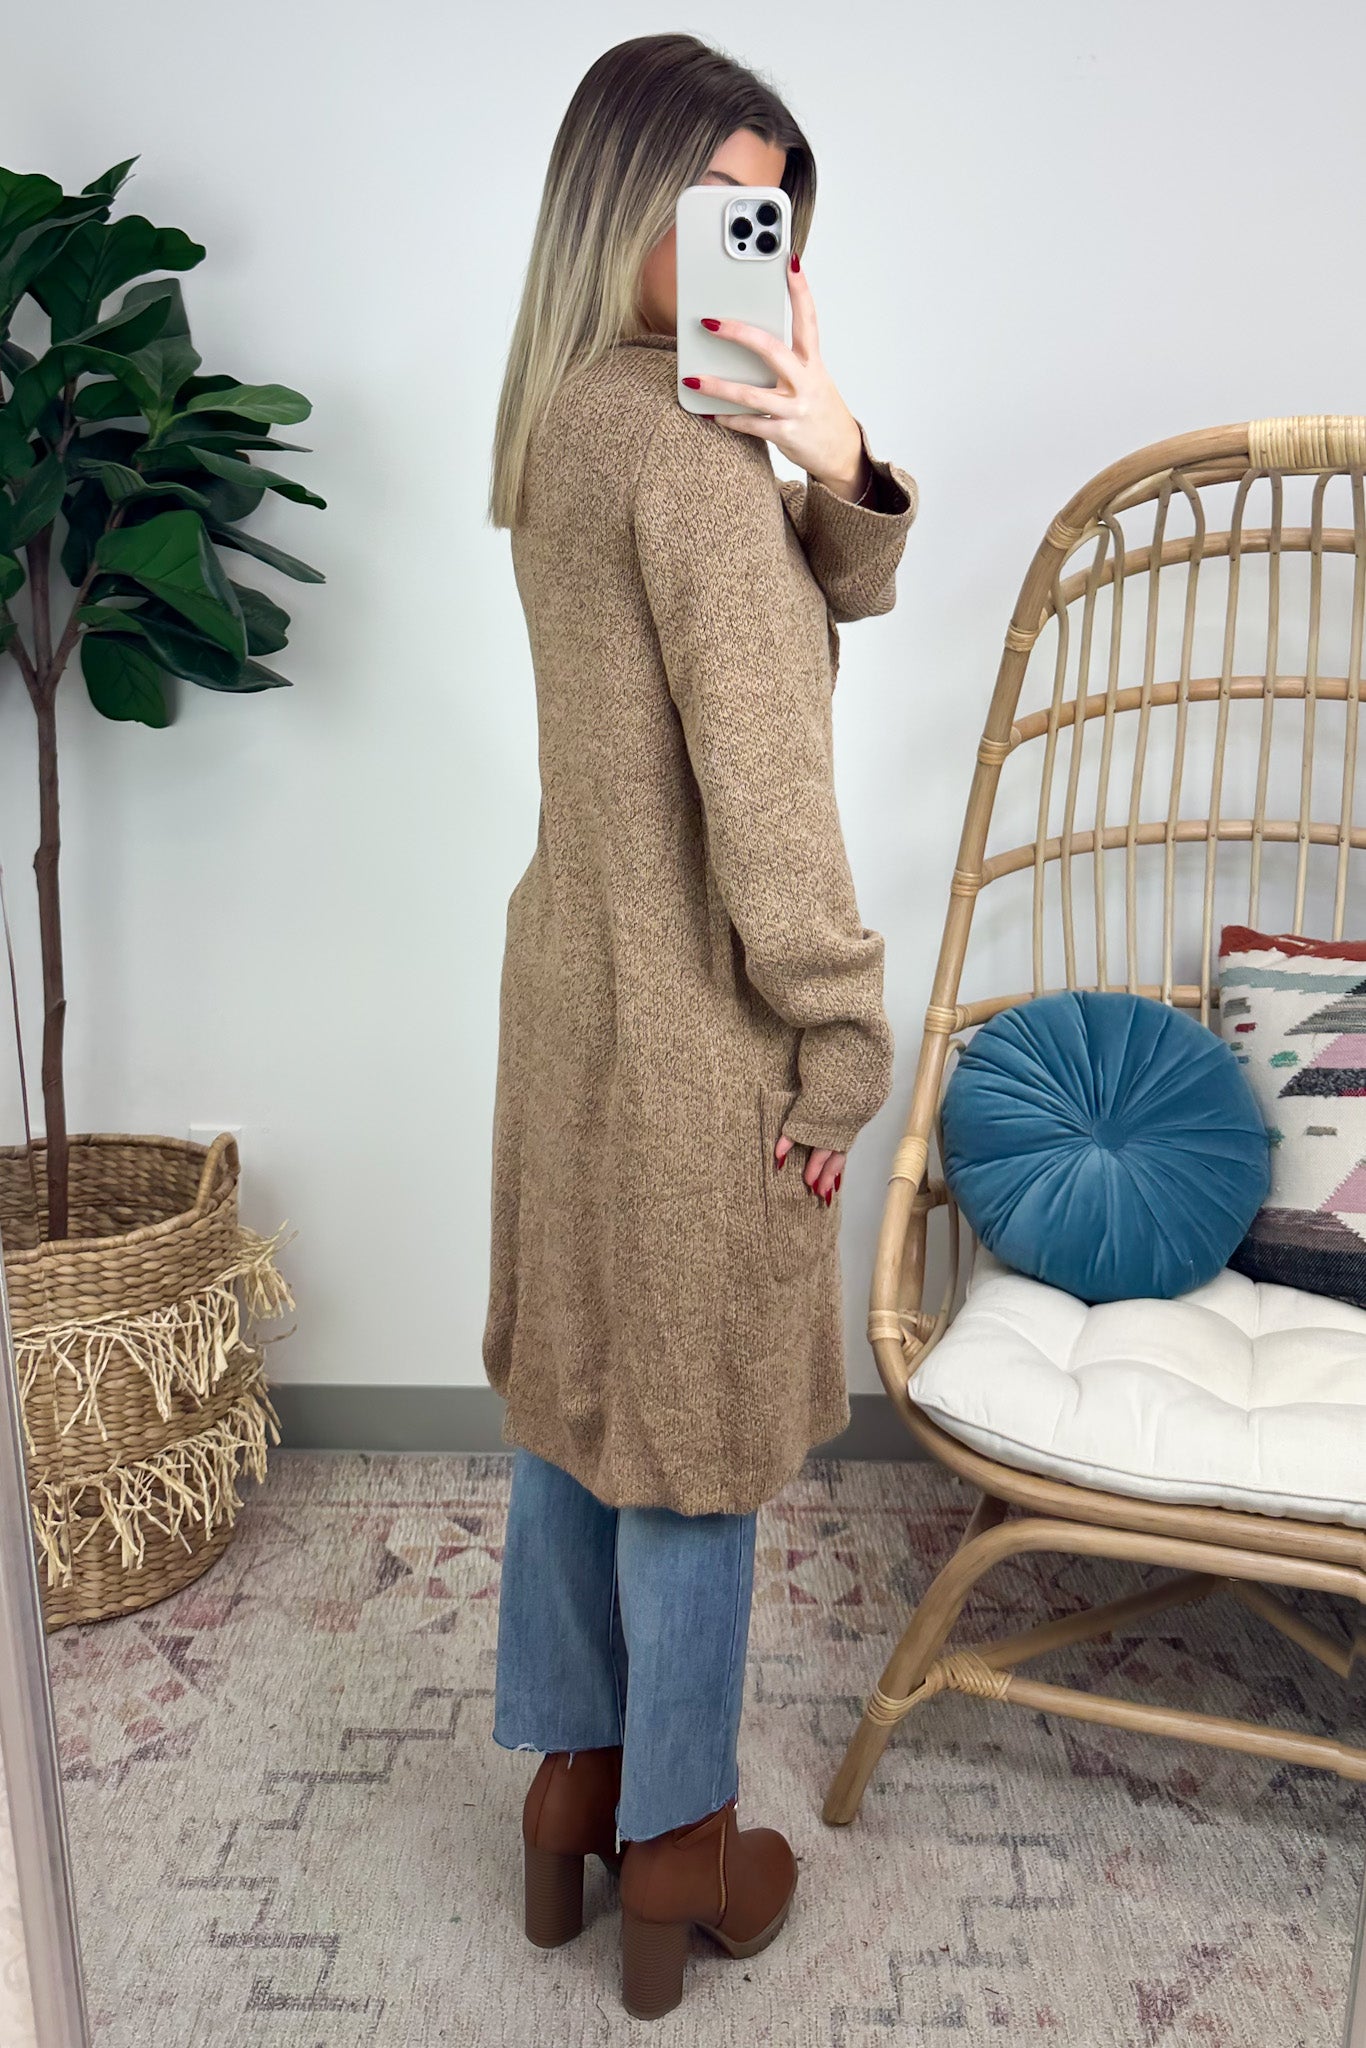  Poised Charm Two Tone Button Coat Cardigan - FINAL SALE - Madison and Mallory